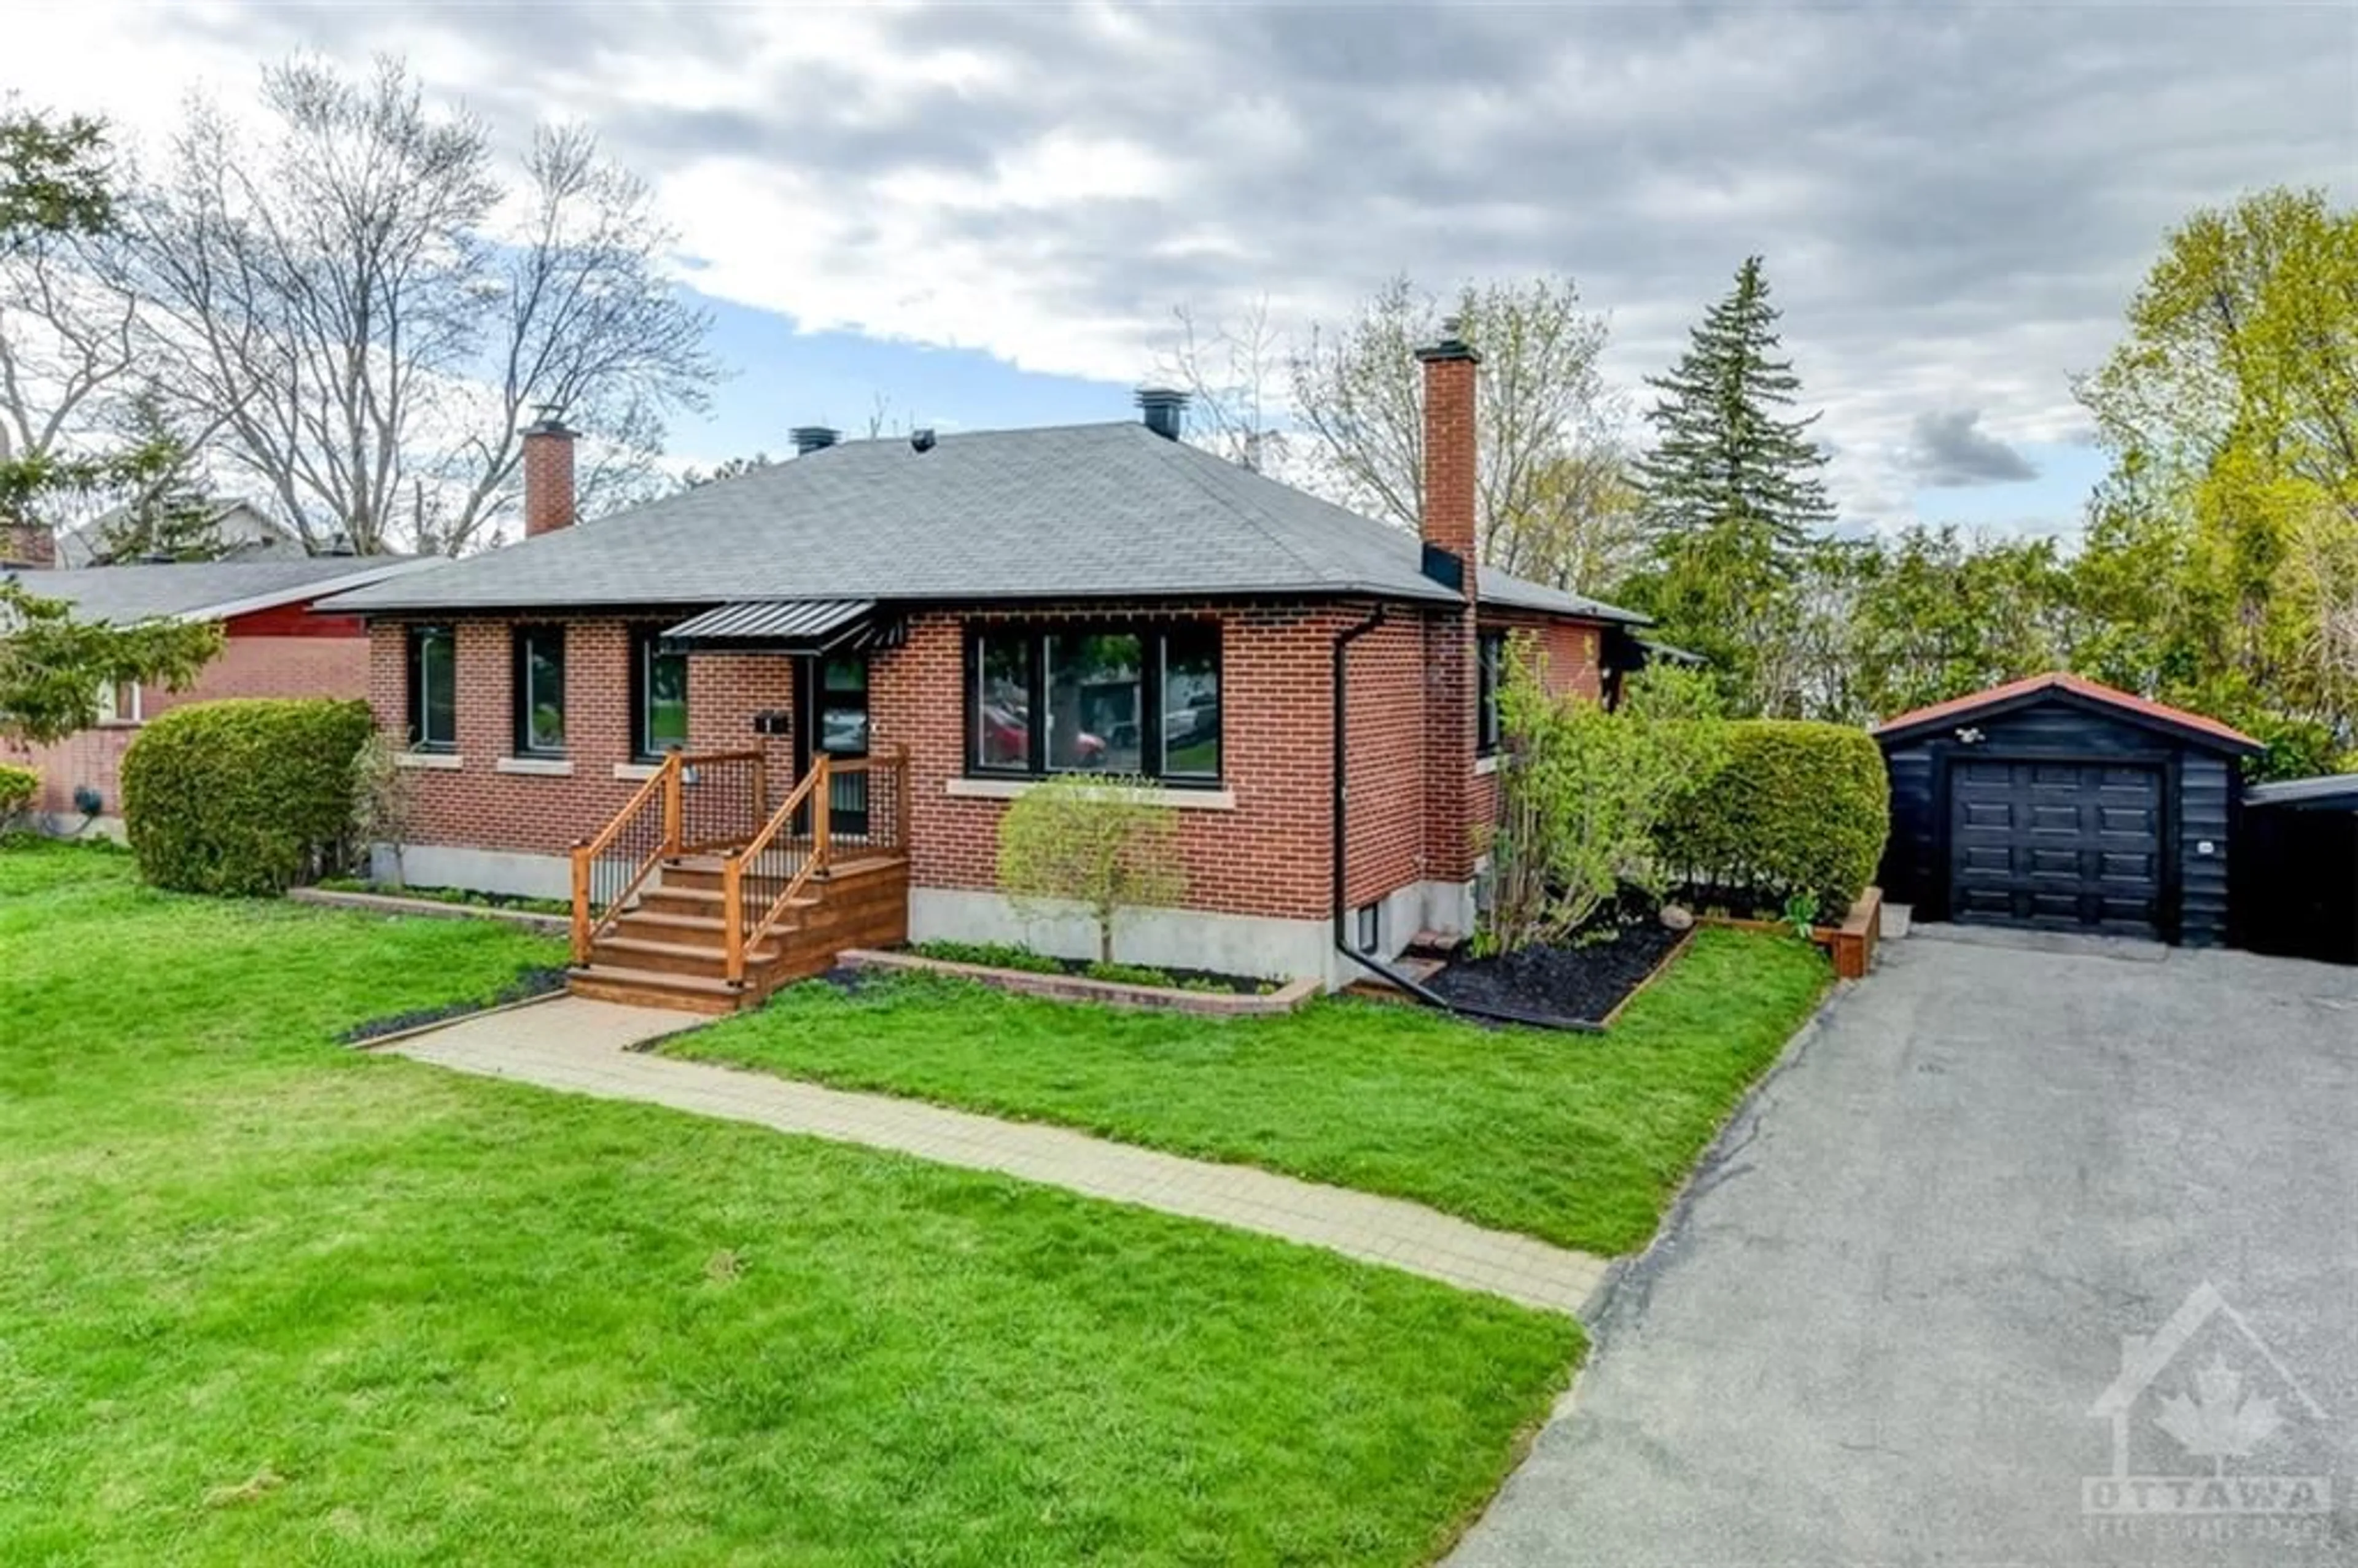 Home with brick exterior material for 1 OAKWOOD Ave, Ottawa Ontario K2E 6A4